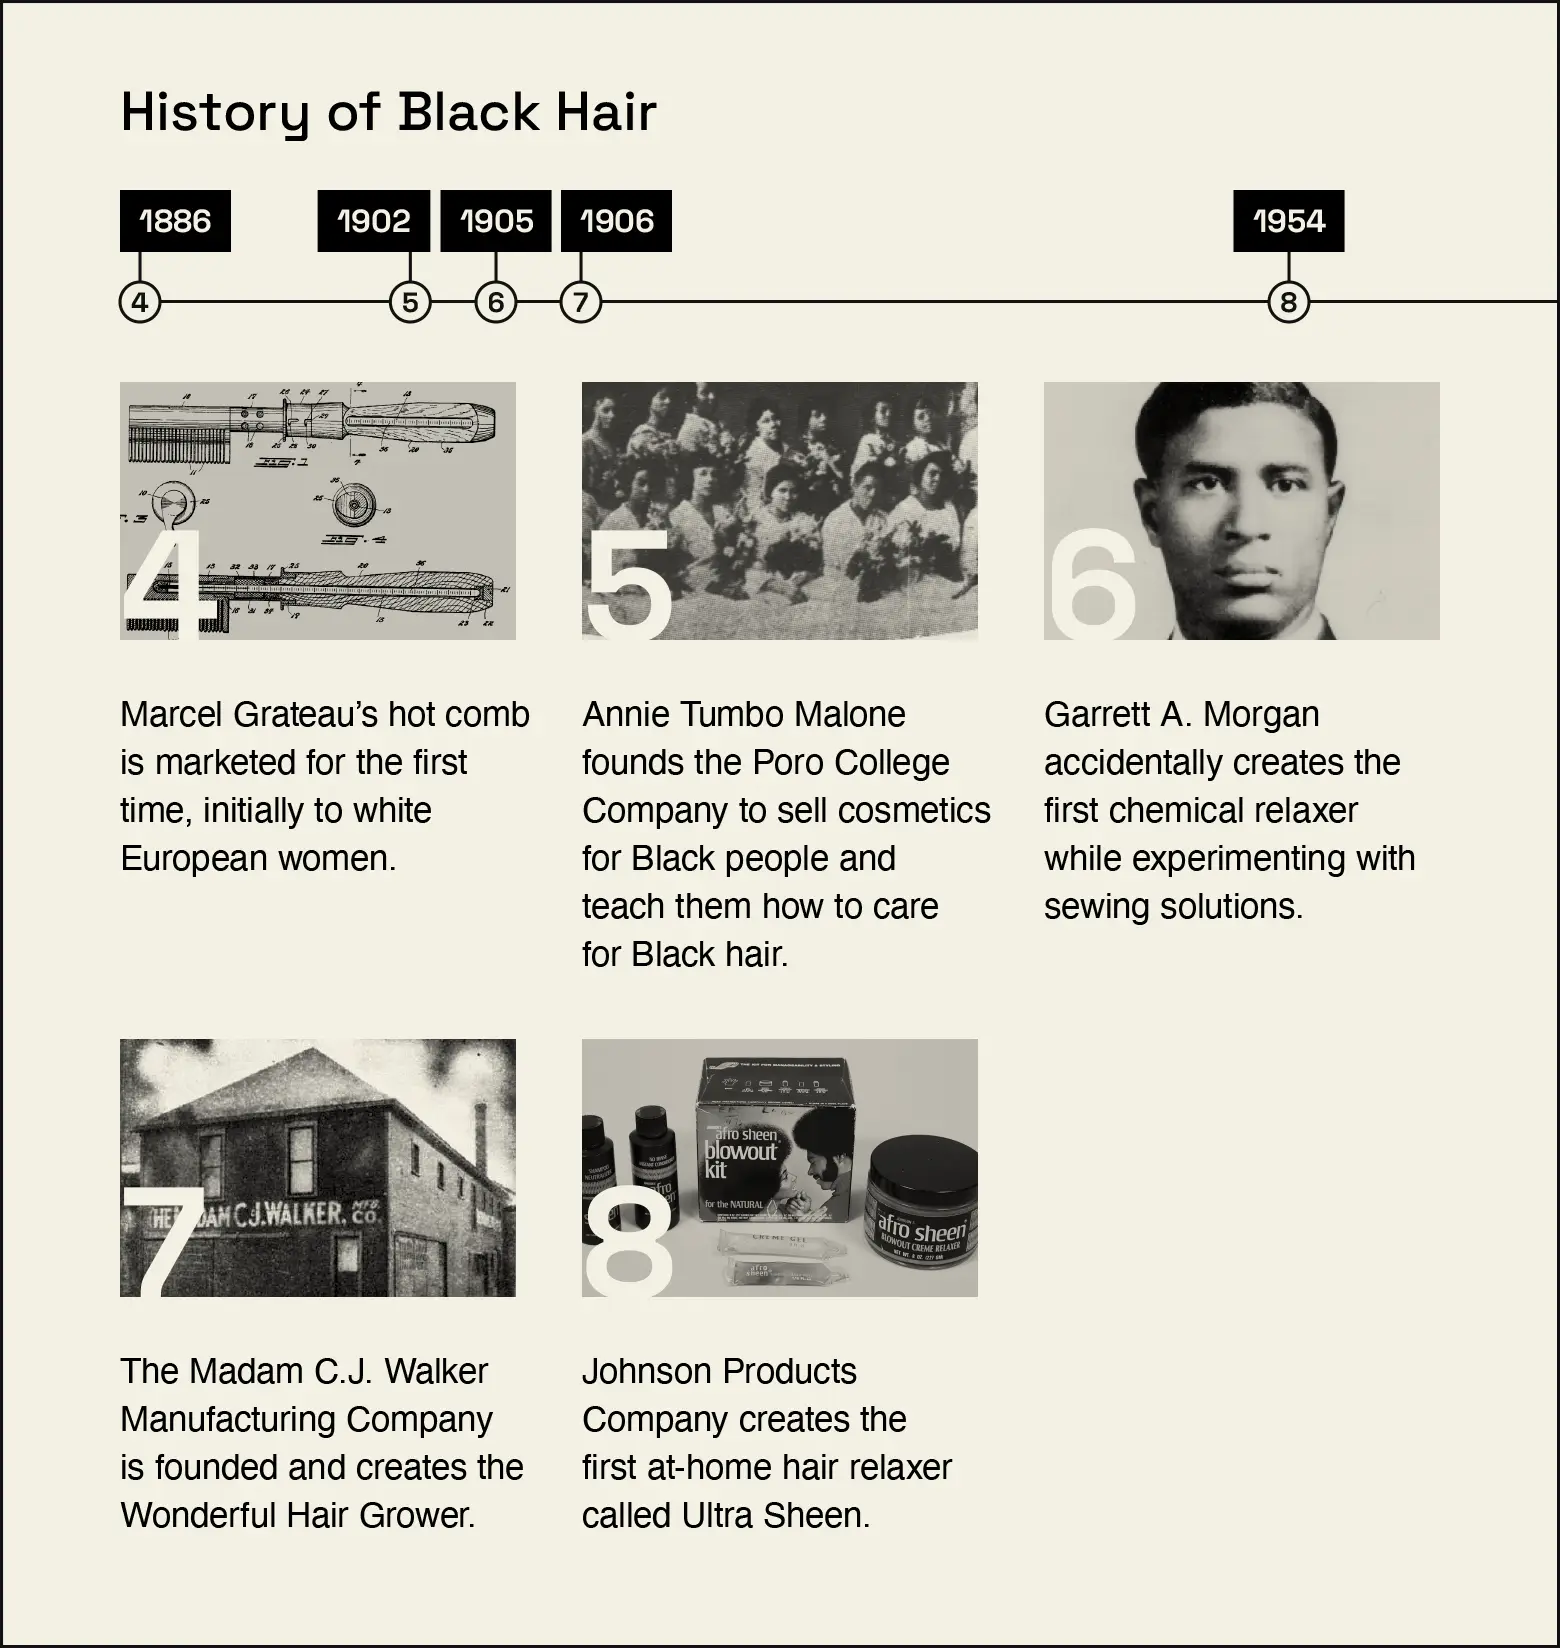 Timeline covers key moments in Black hair history from 1186 to 1954.